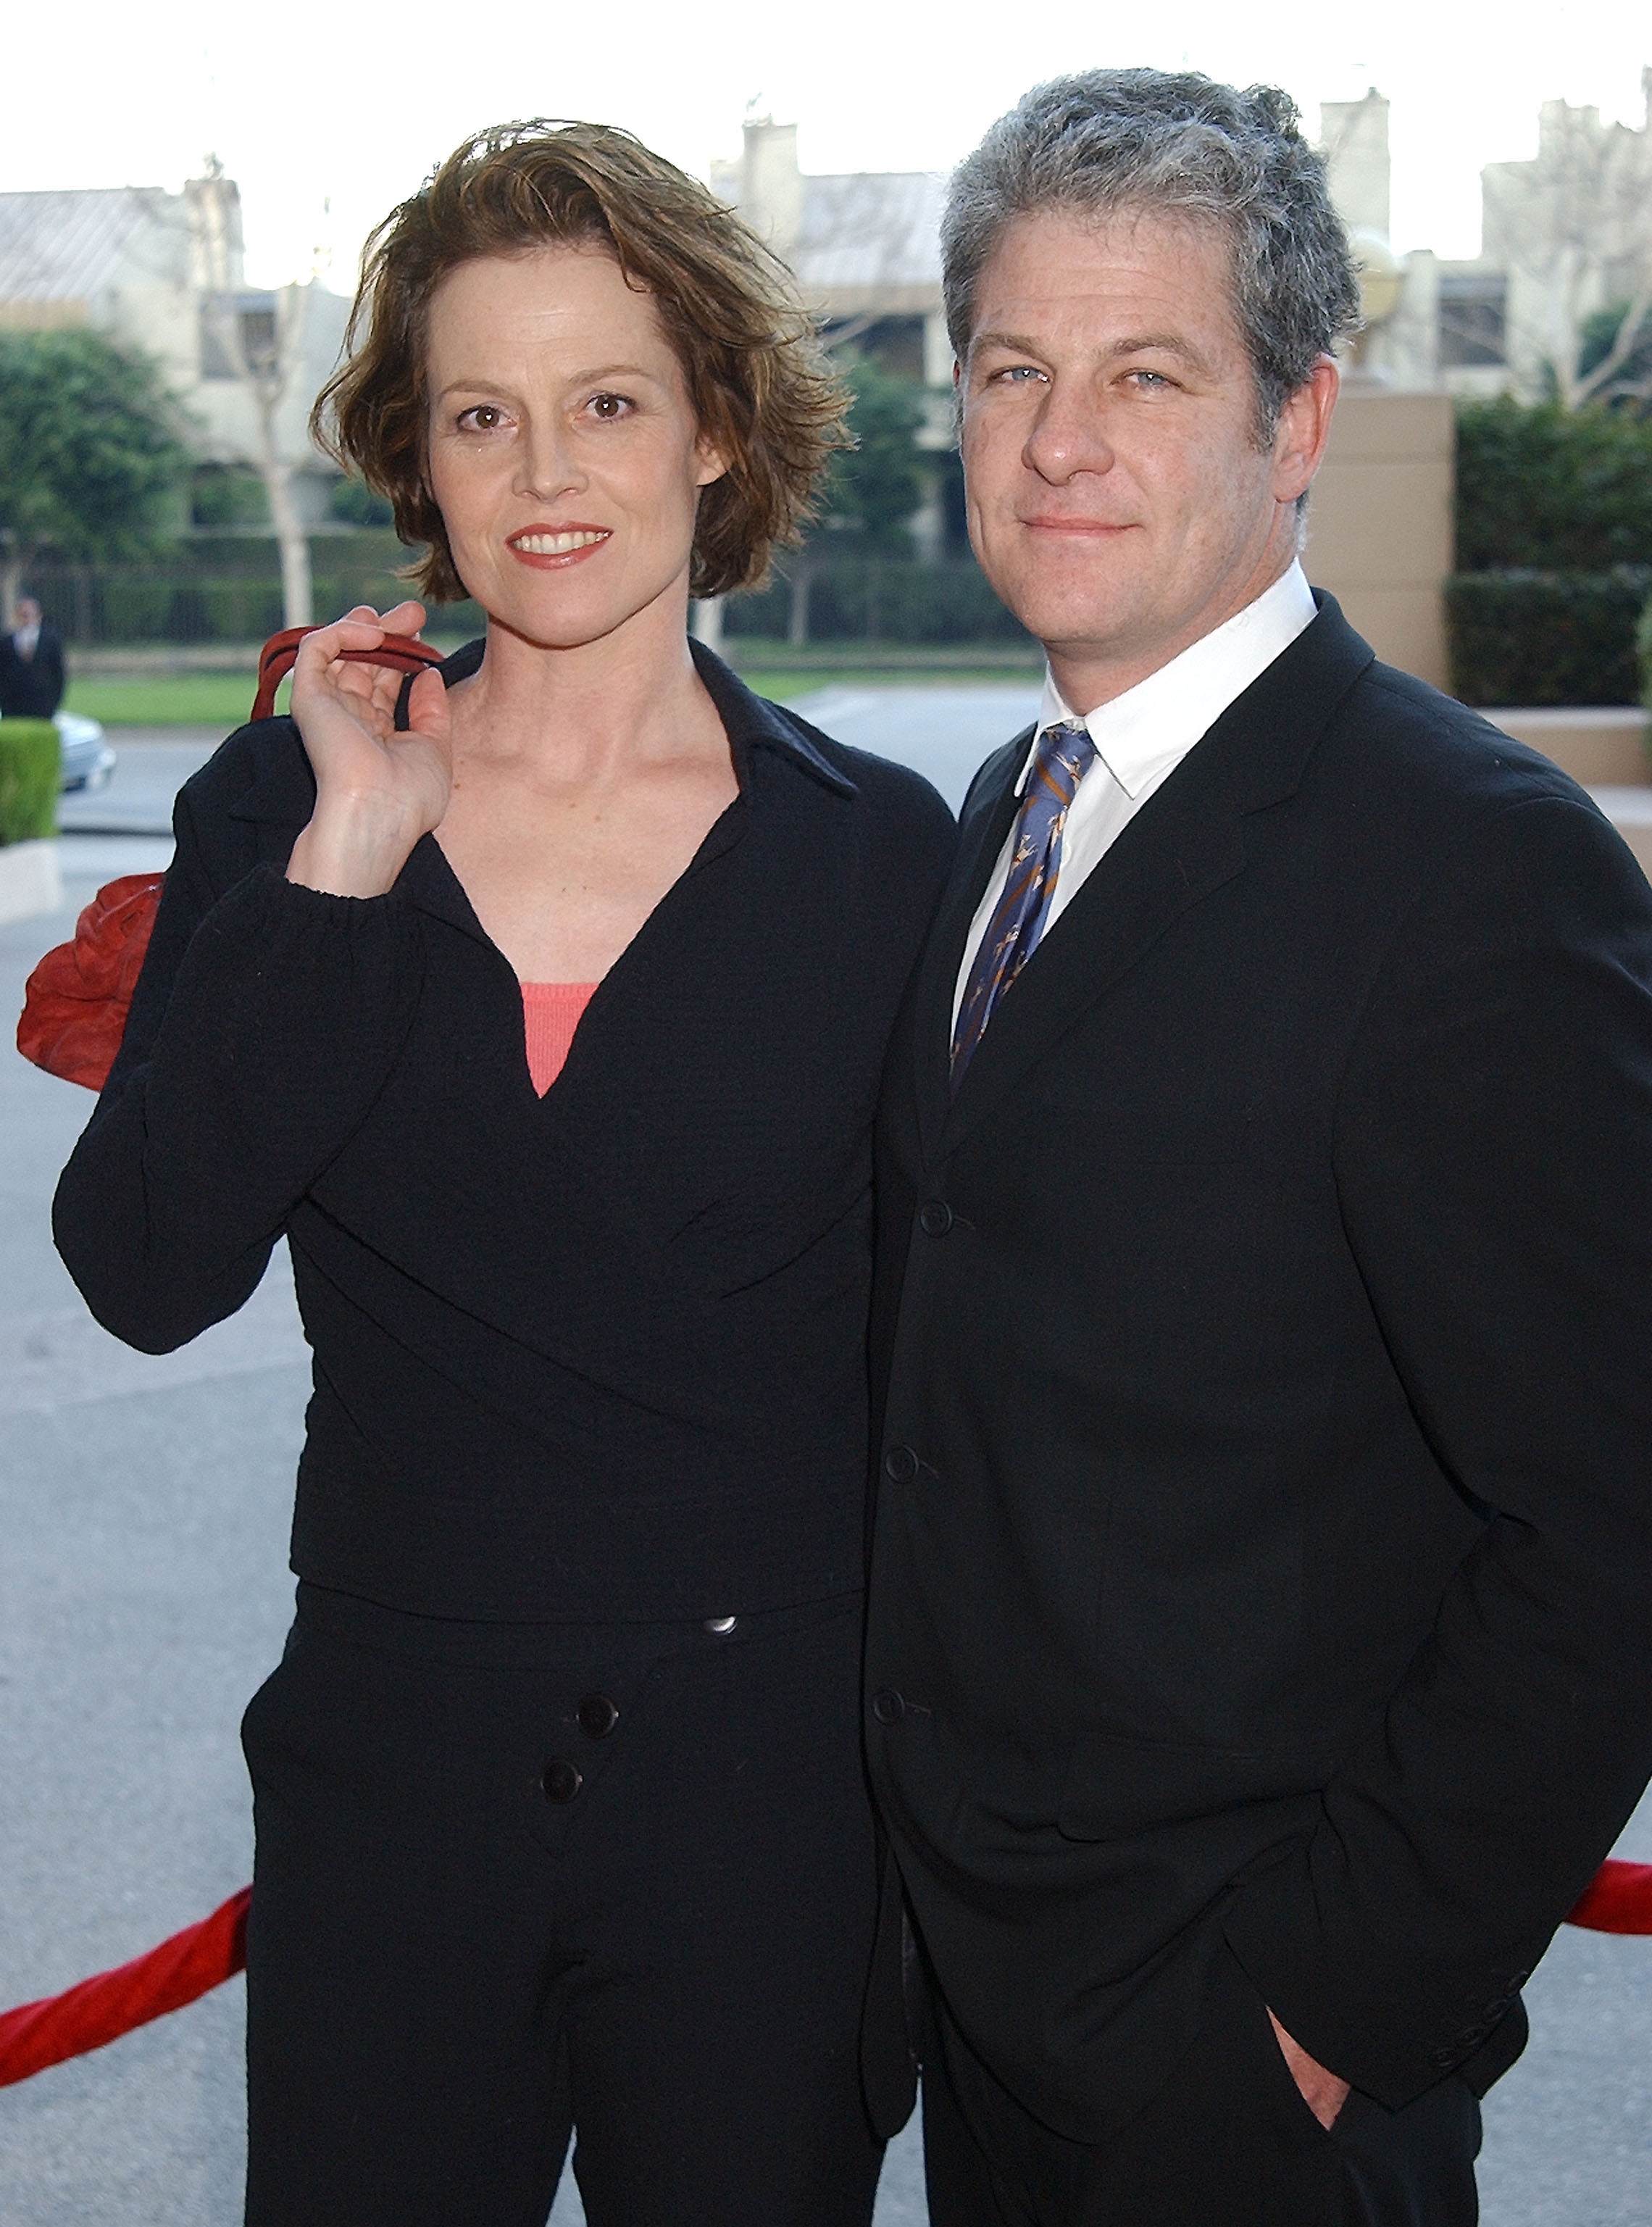 Sigourney Weaver and her husband, Jim Simpson, during the 9th Annual BAFTA/LA Tea Party in Los Angeles, California, on January 18, 2003 | Source: Getty Images